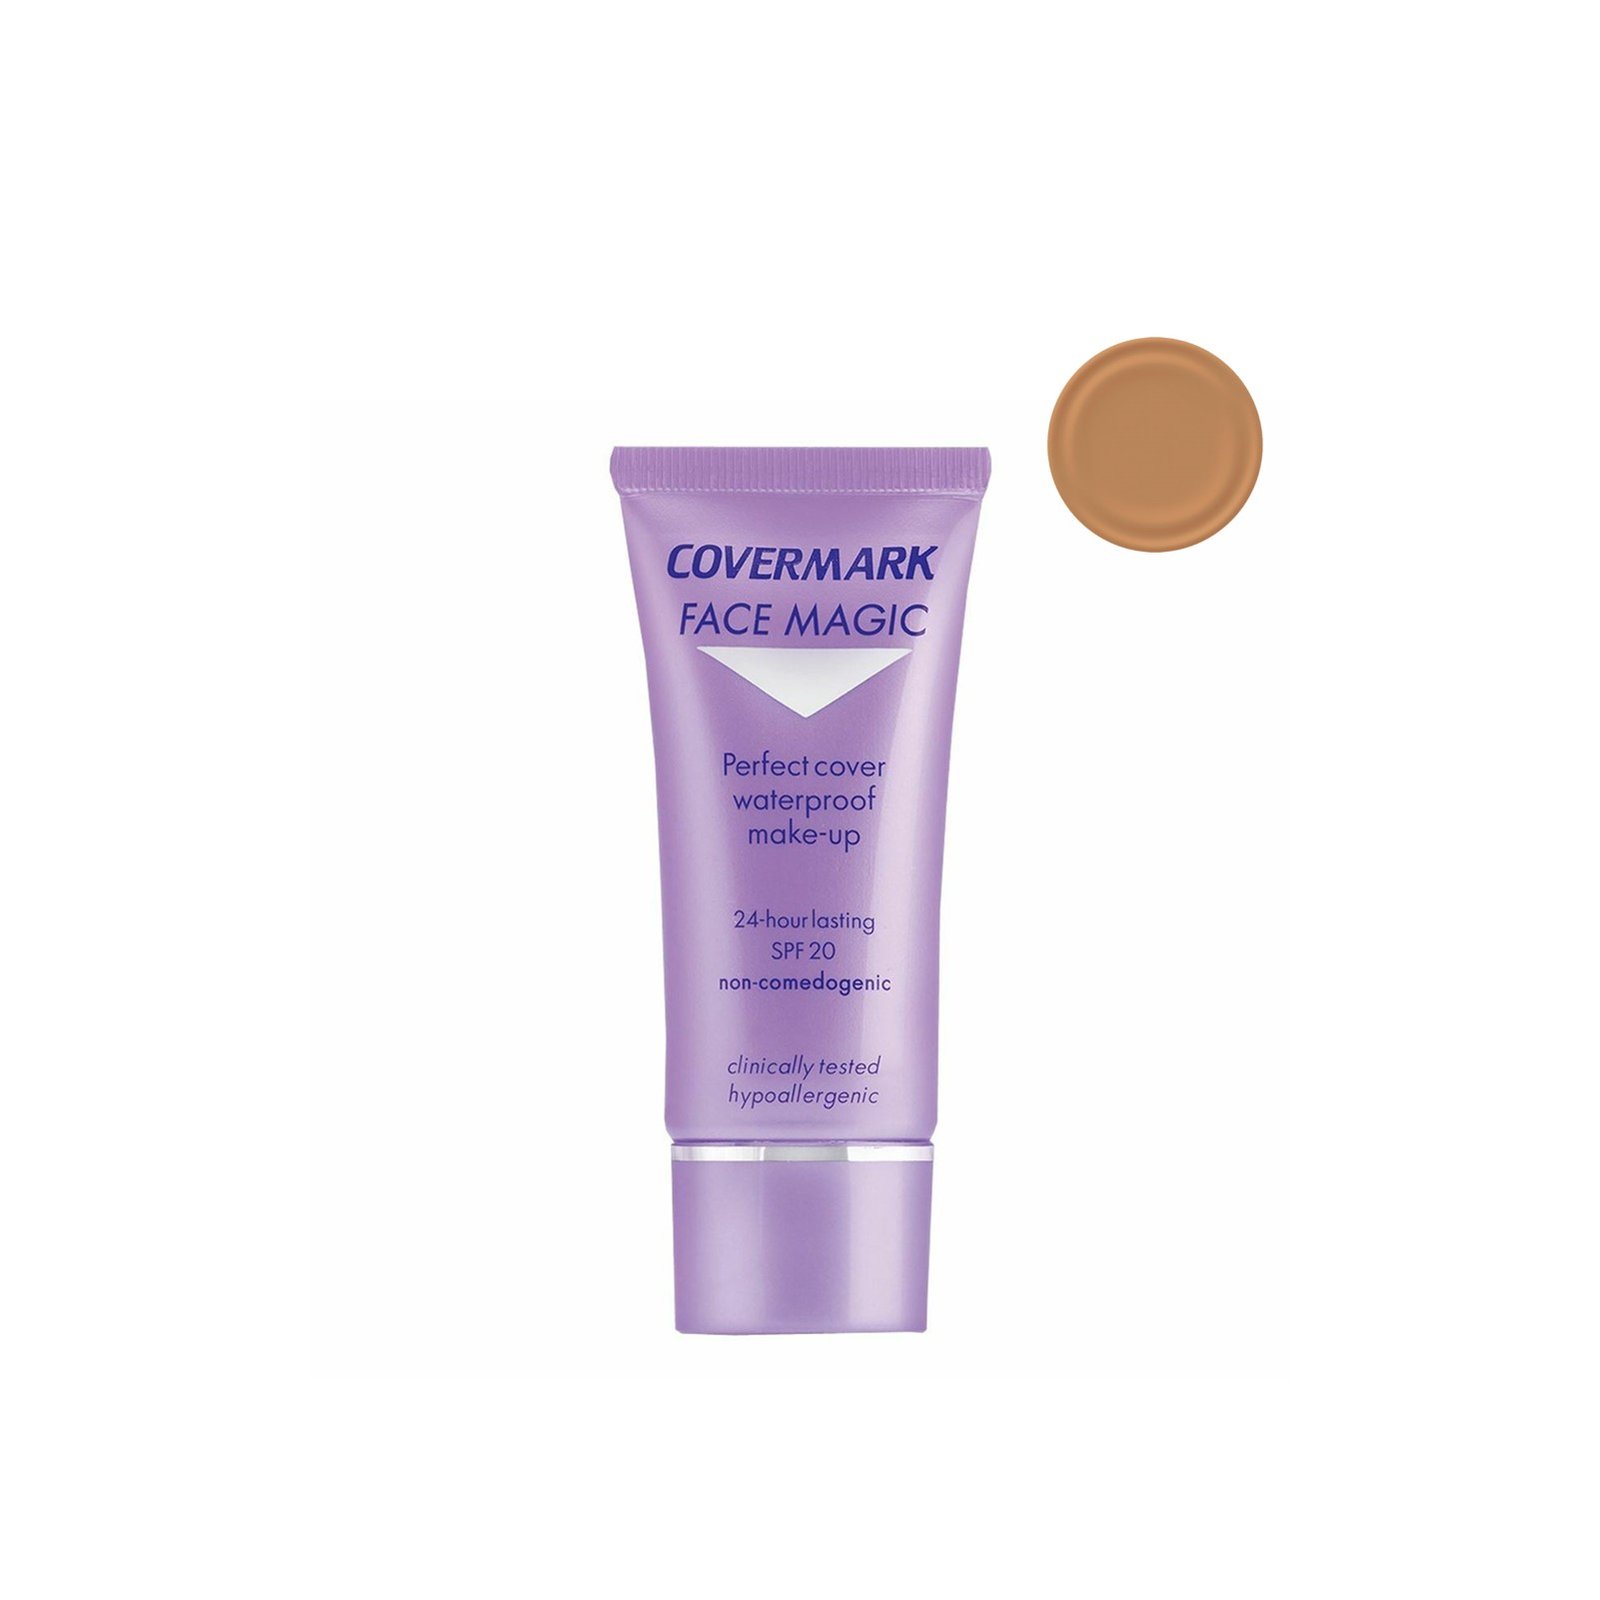 Covermark Face Magic Perfect Cover Waterproof Make-Up SPF20 8 30ml